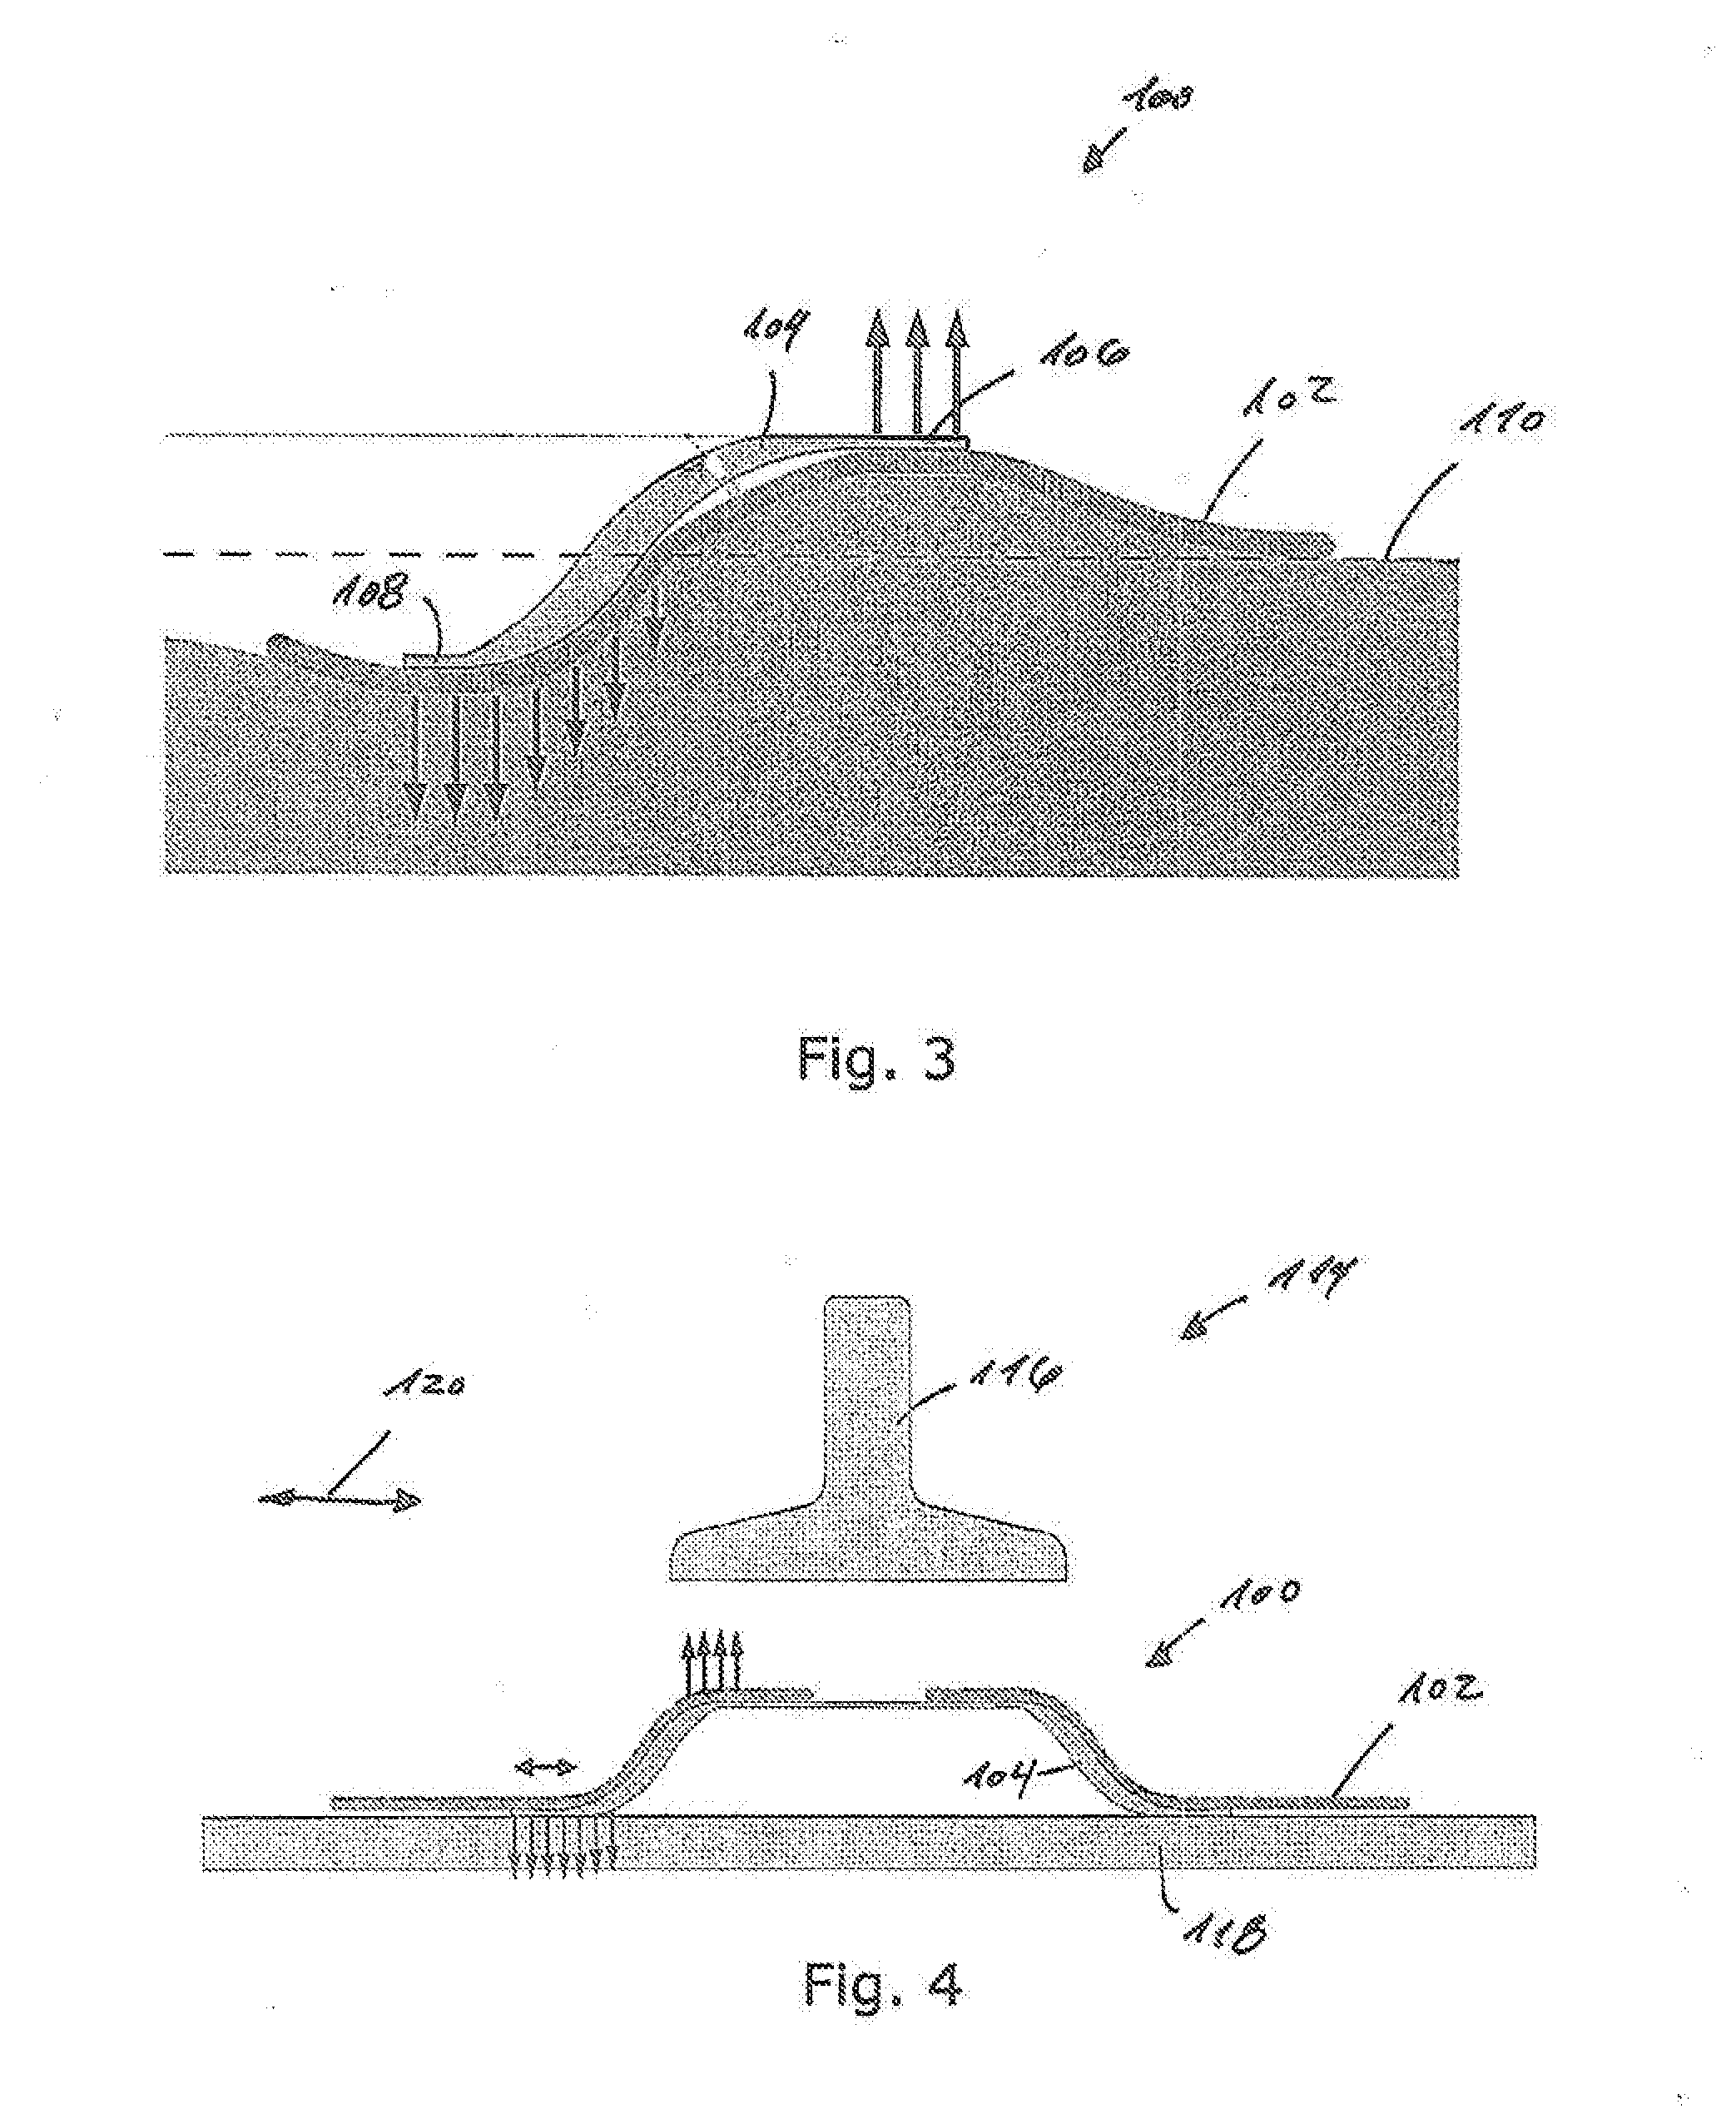 Convex supporting device